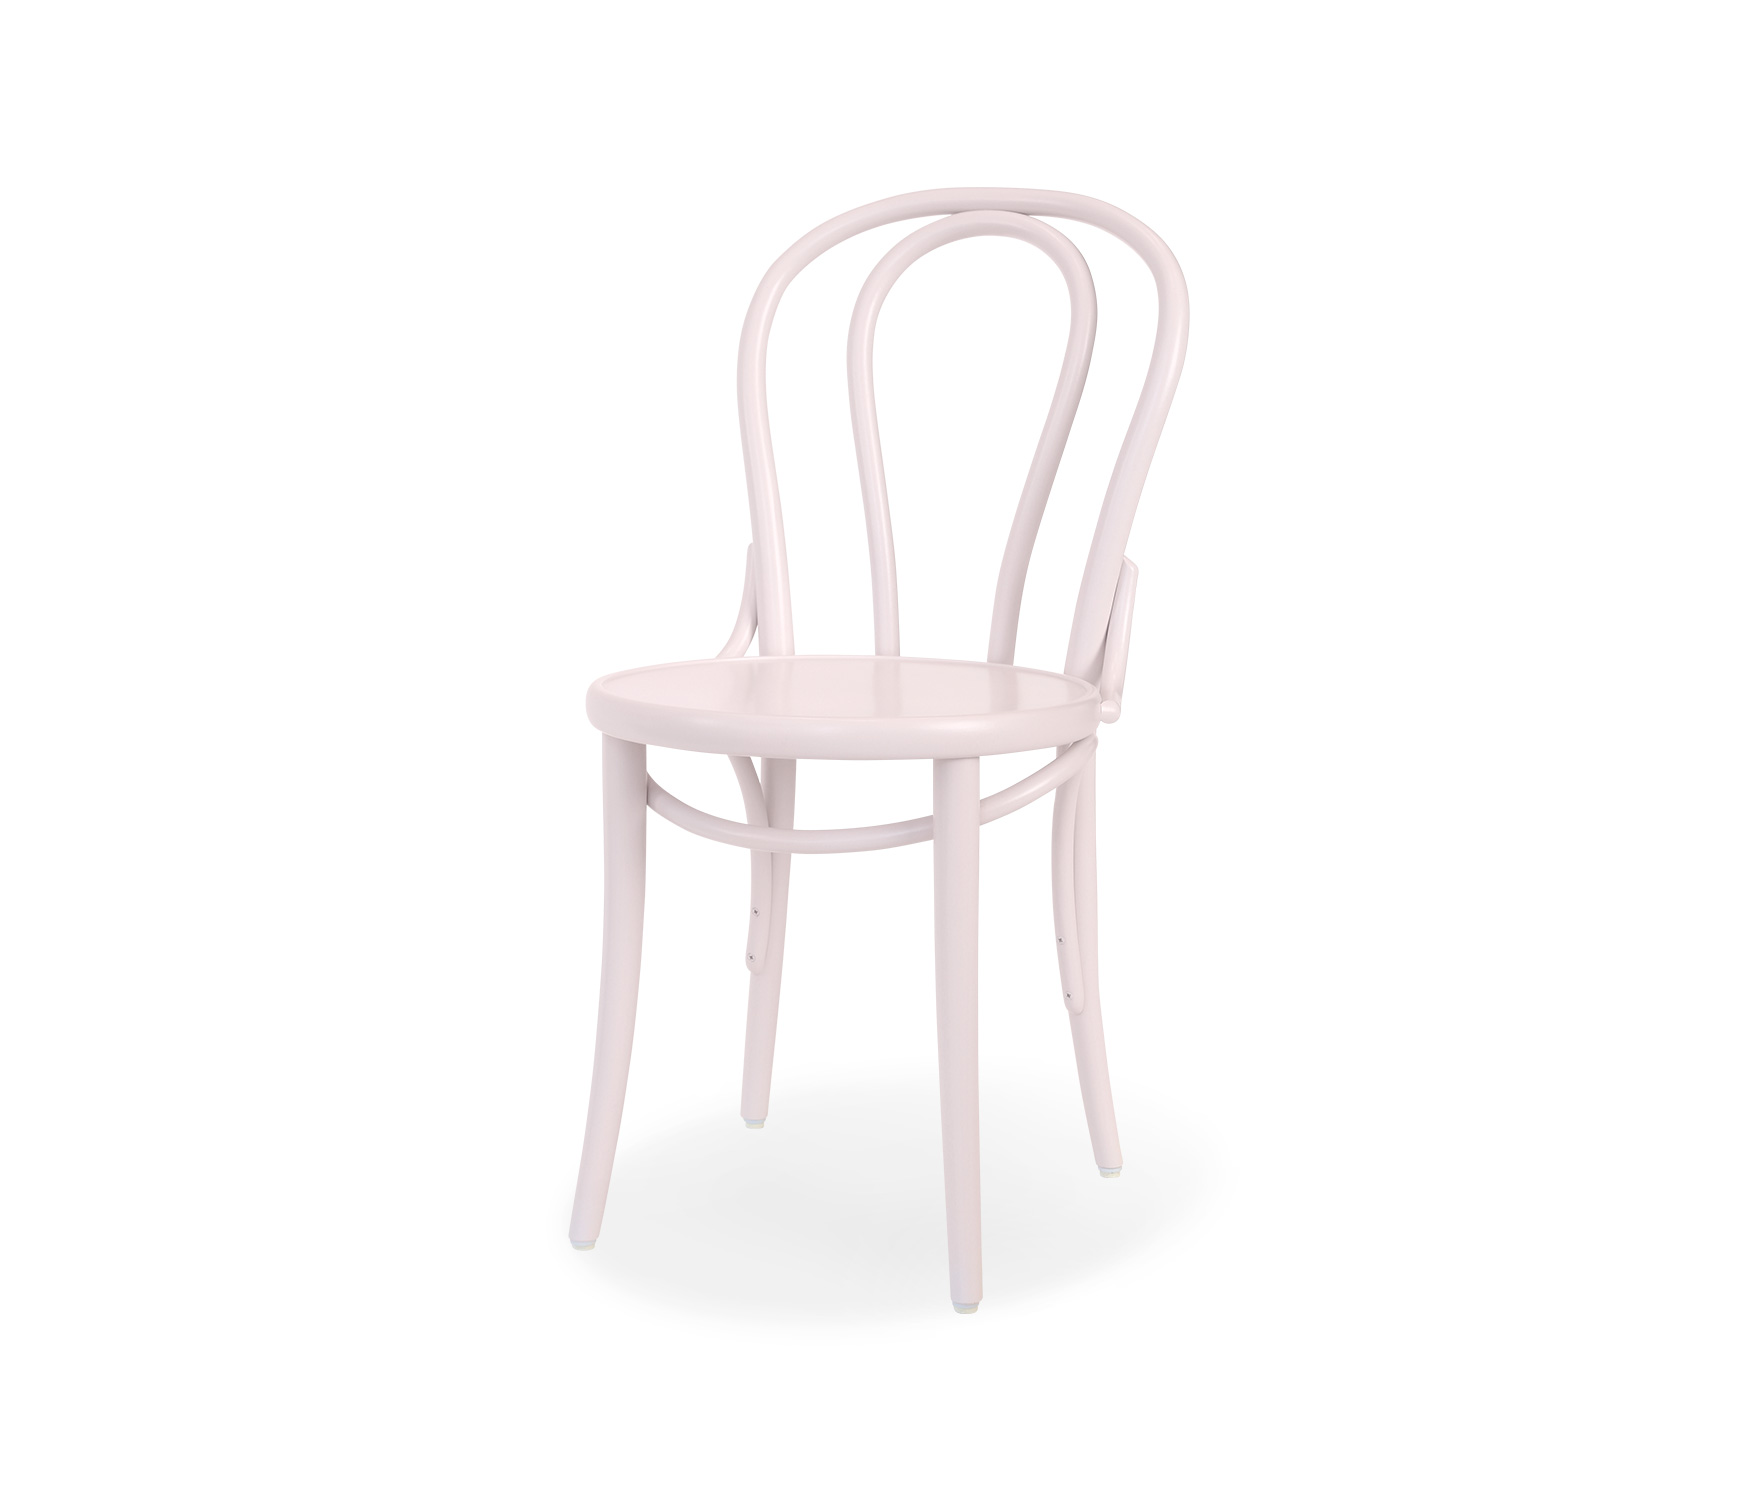 Chair 18 - Nude Pink